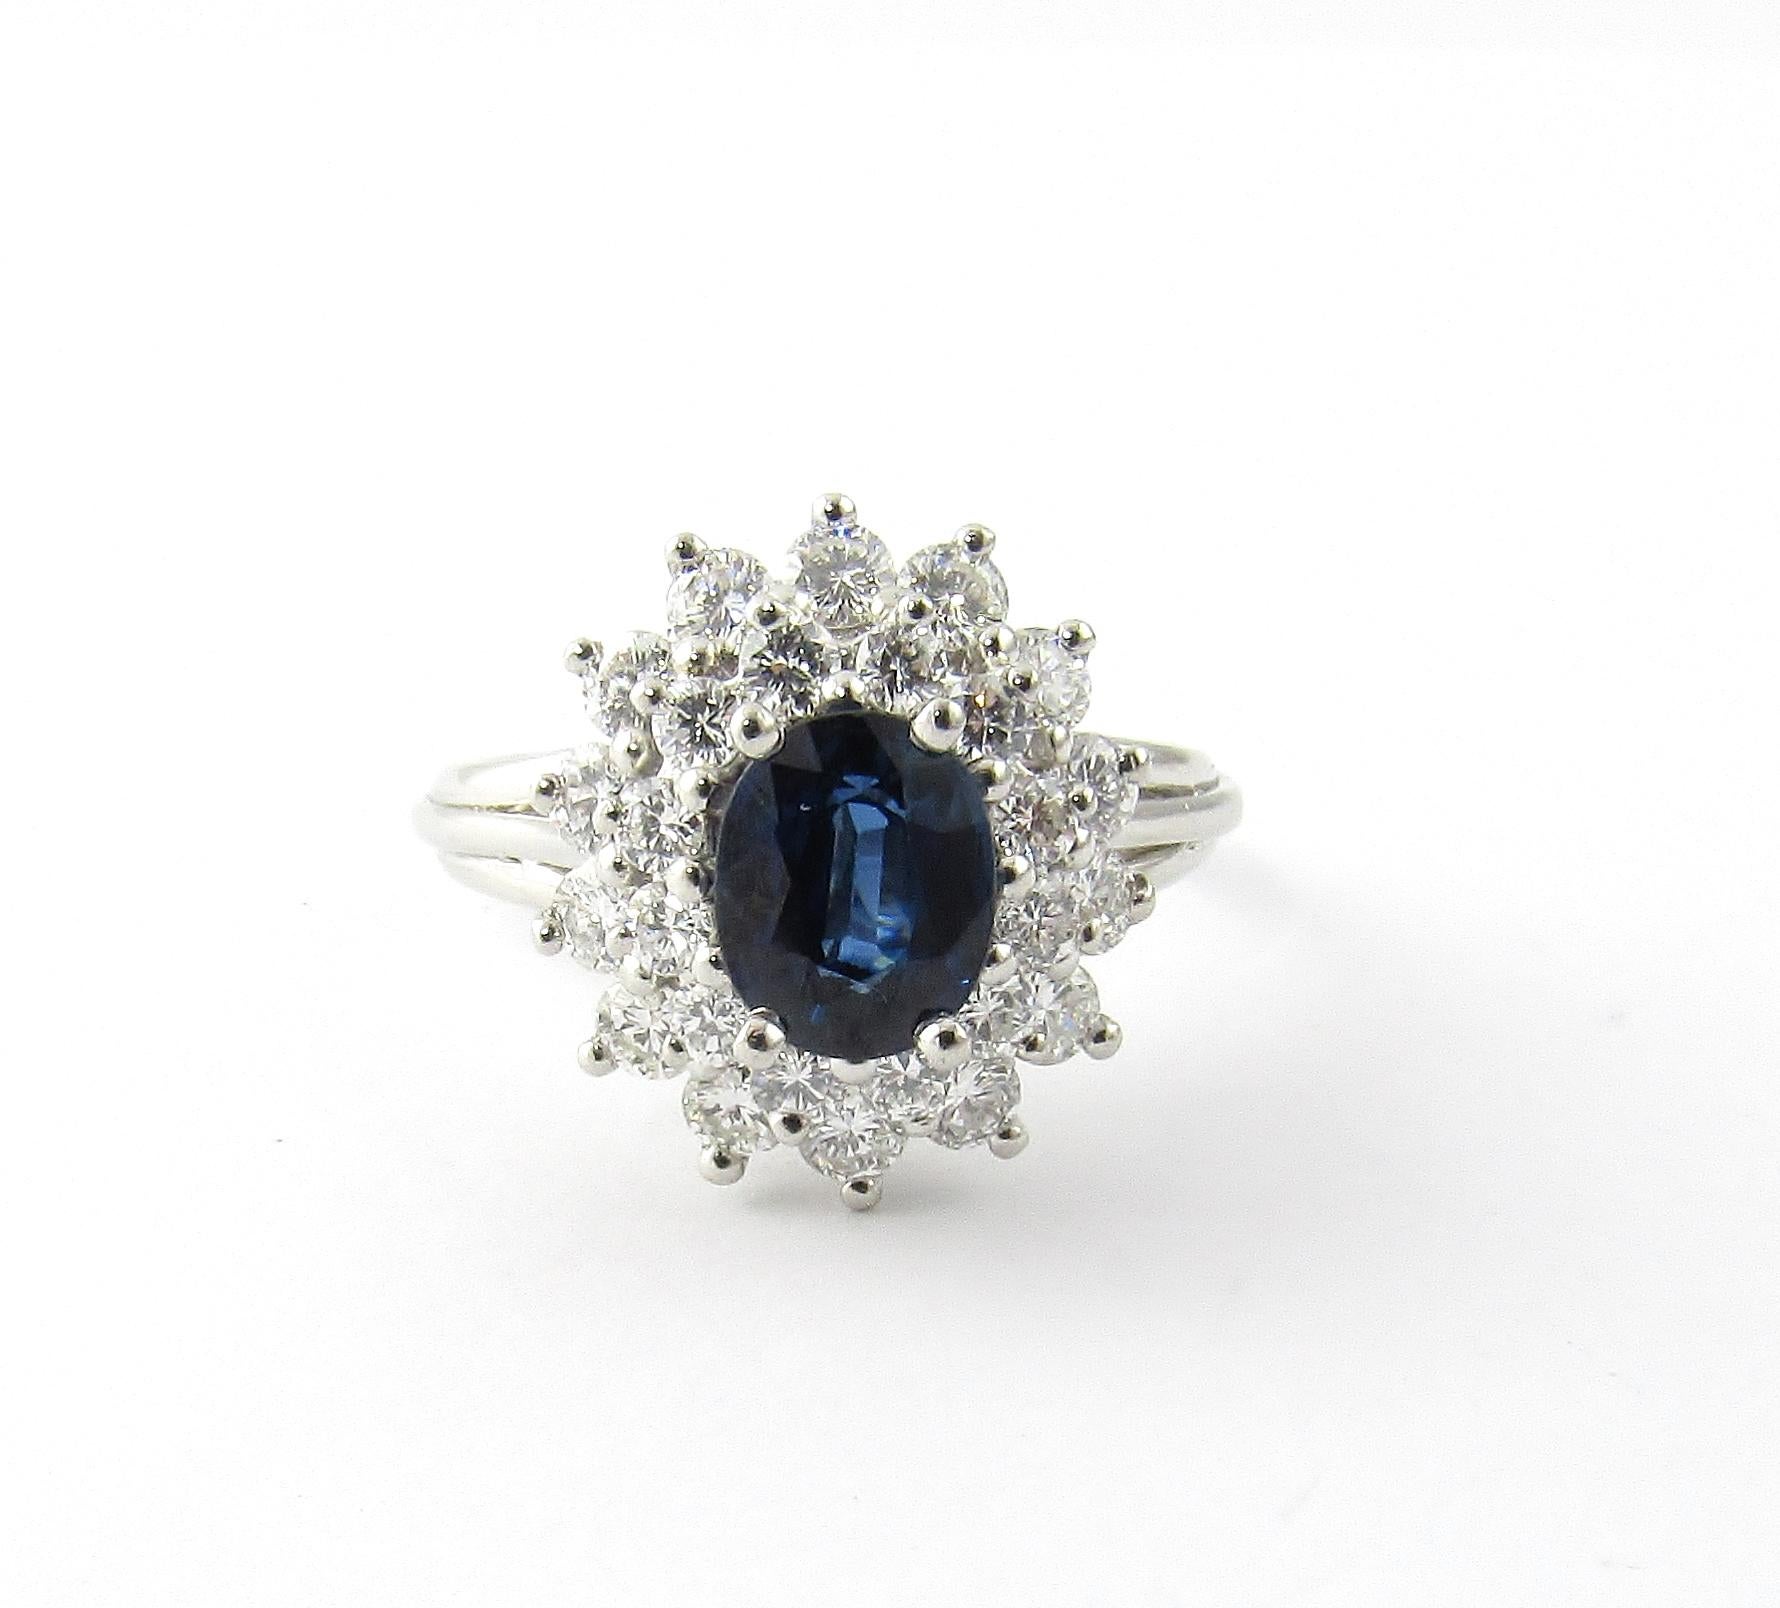 Vintage Platinum Natural Sapphire and Diamond Ring Size 6.75-

This stunning ring features one oval blue sapphire (7 mm x 6 mm) surrounded by 26 round brilliant cut diamonds and set in beautifully detailed platinum.  

Top of ring measures 15 mm x